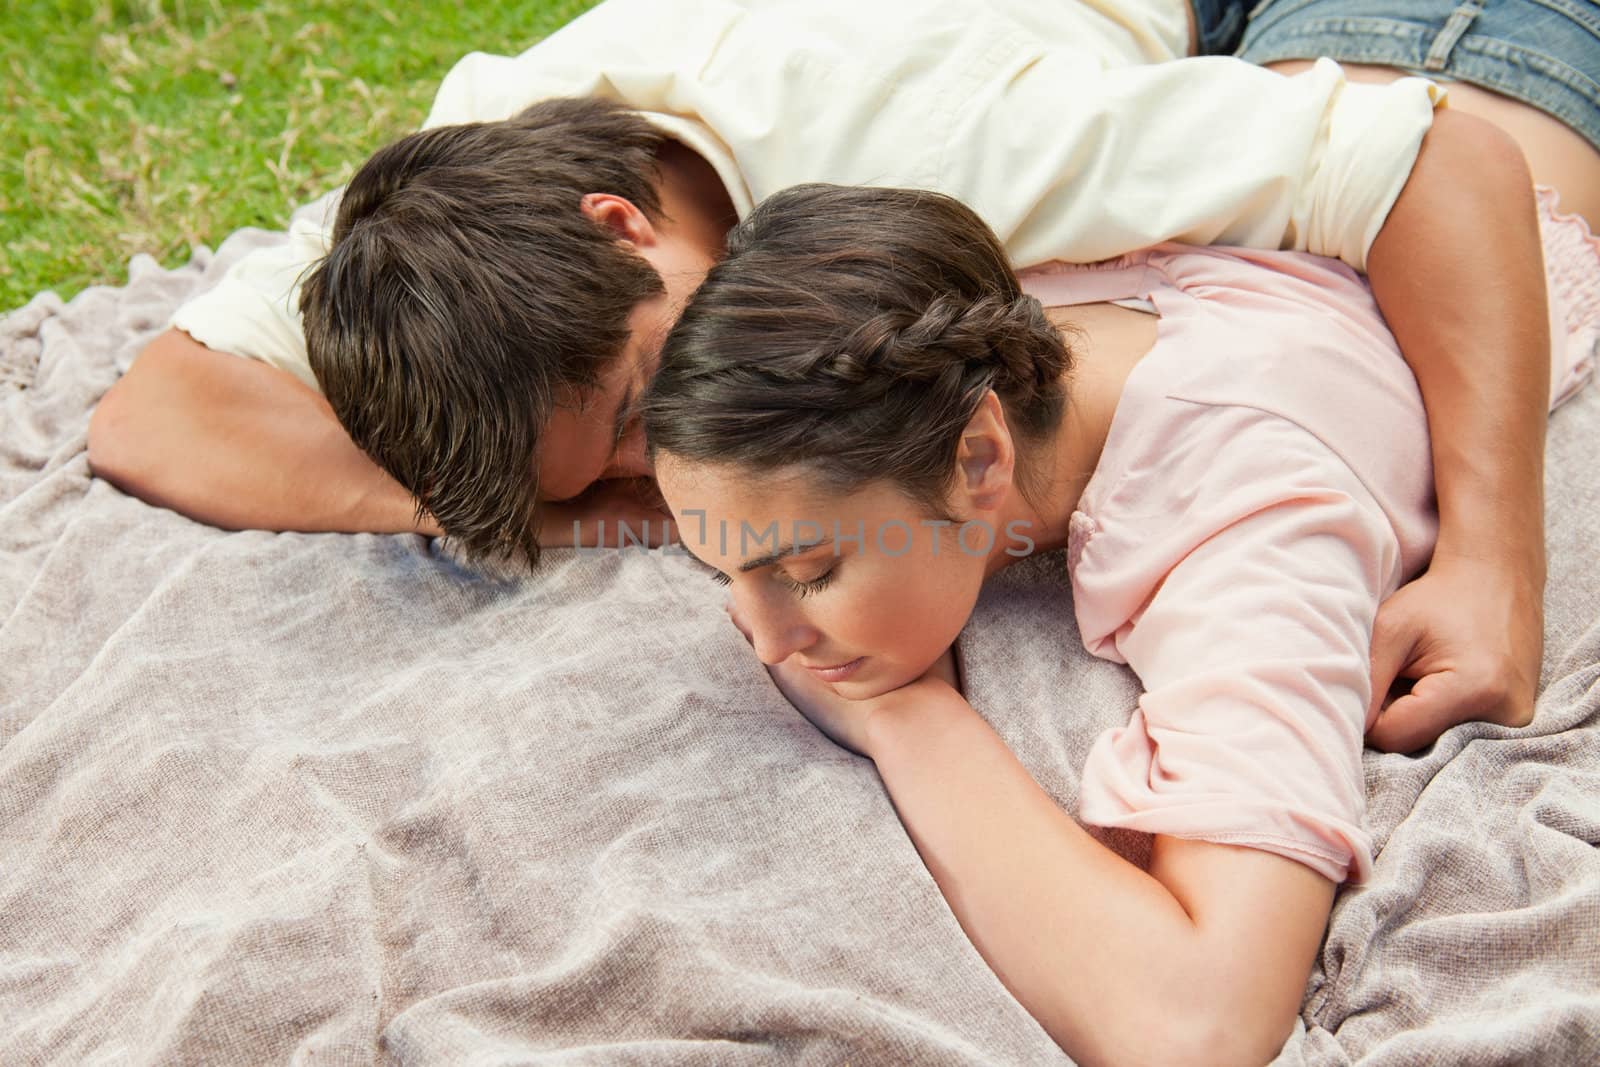 Man with his arm around his female friend while they are lying prone on a grey blanket int the grass